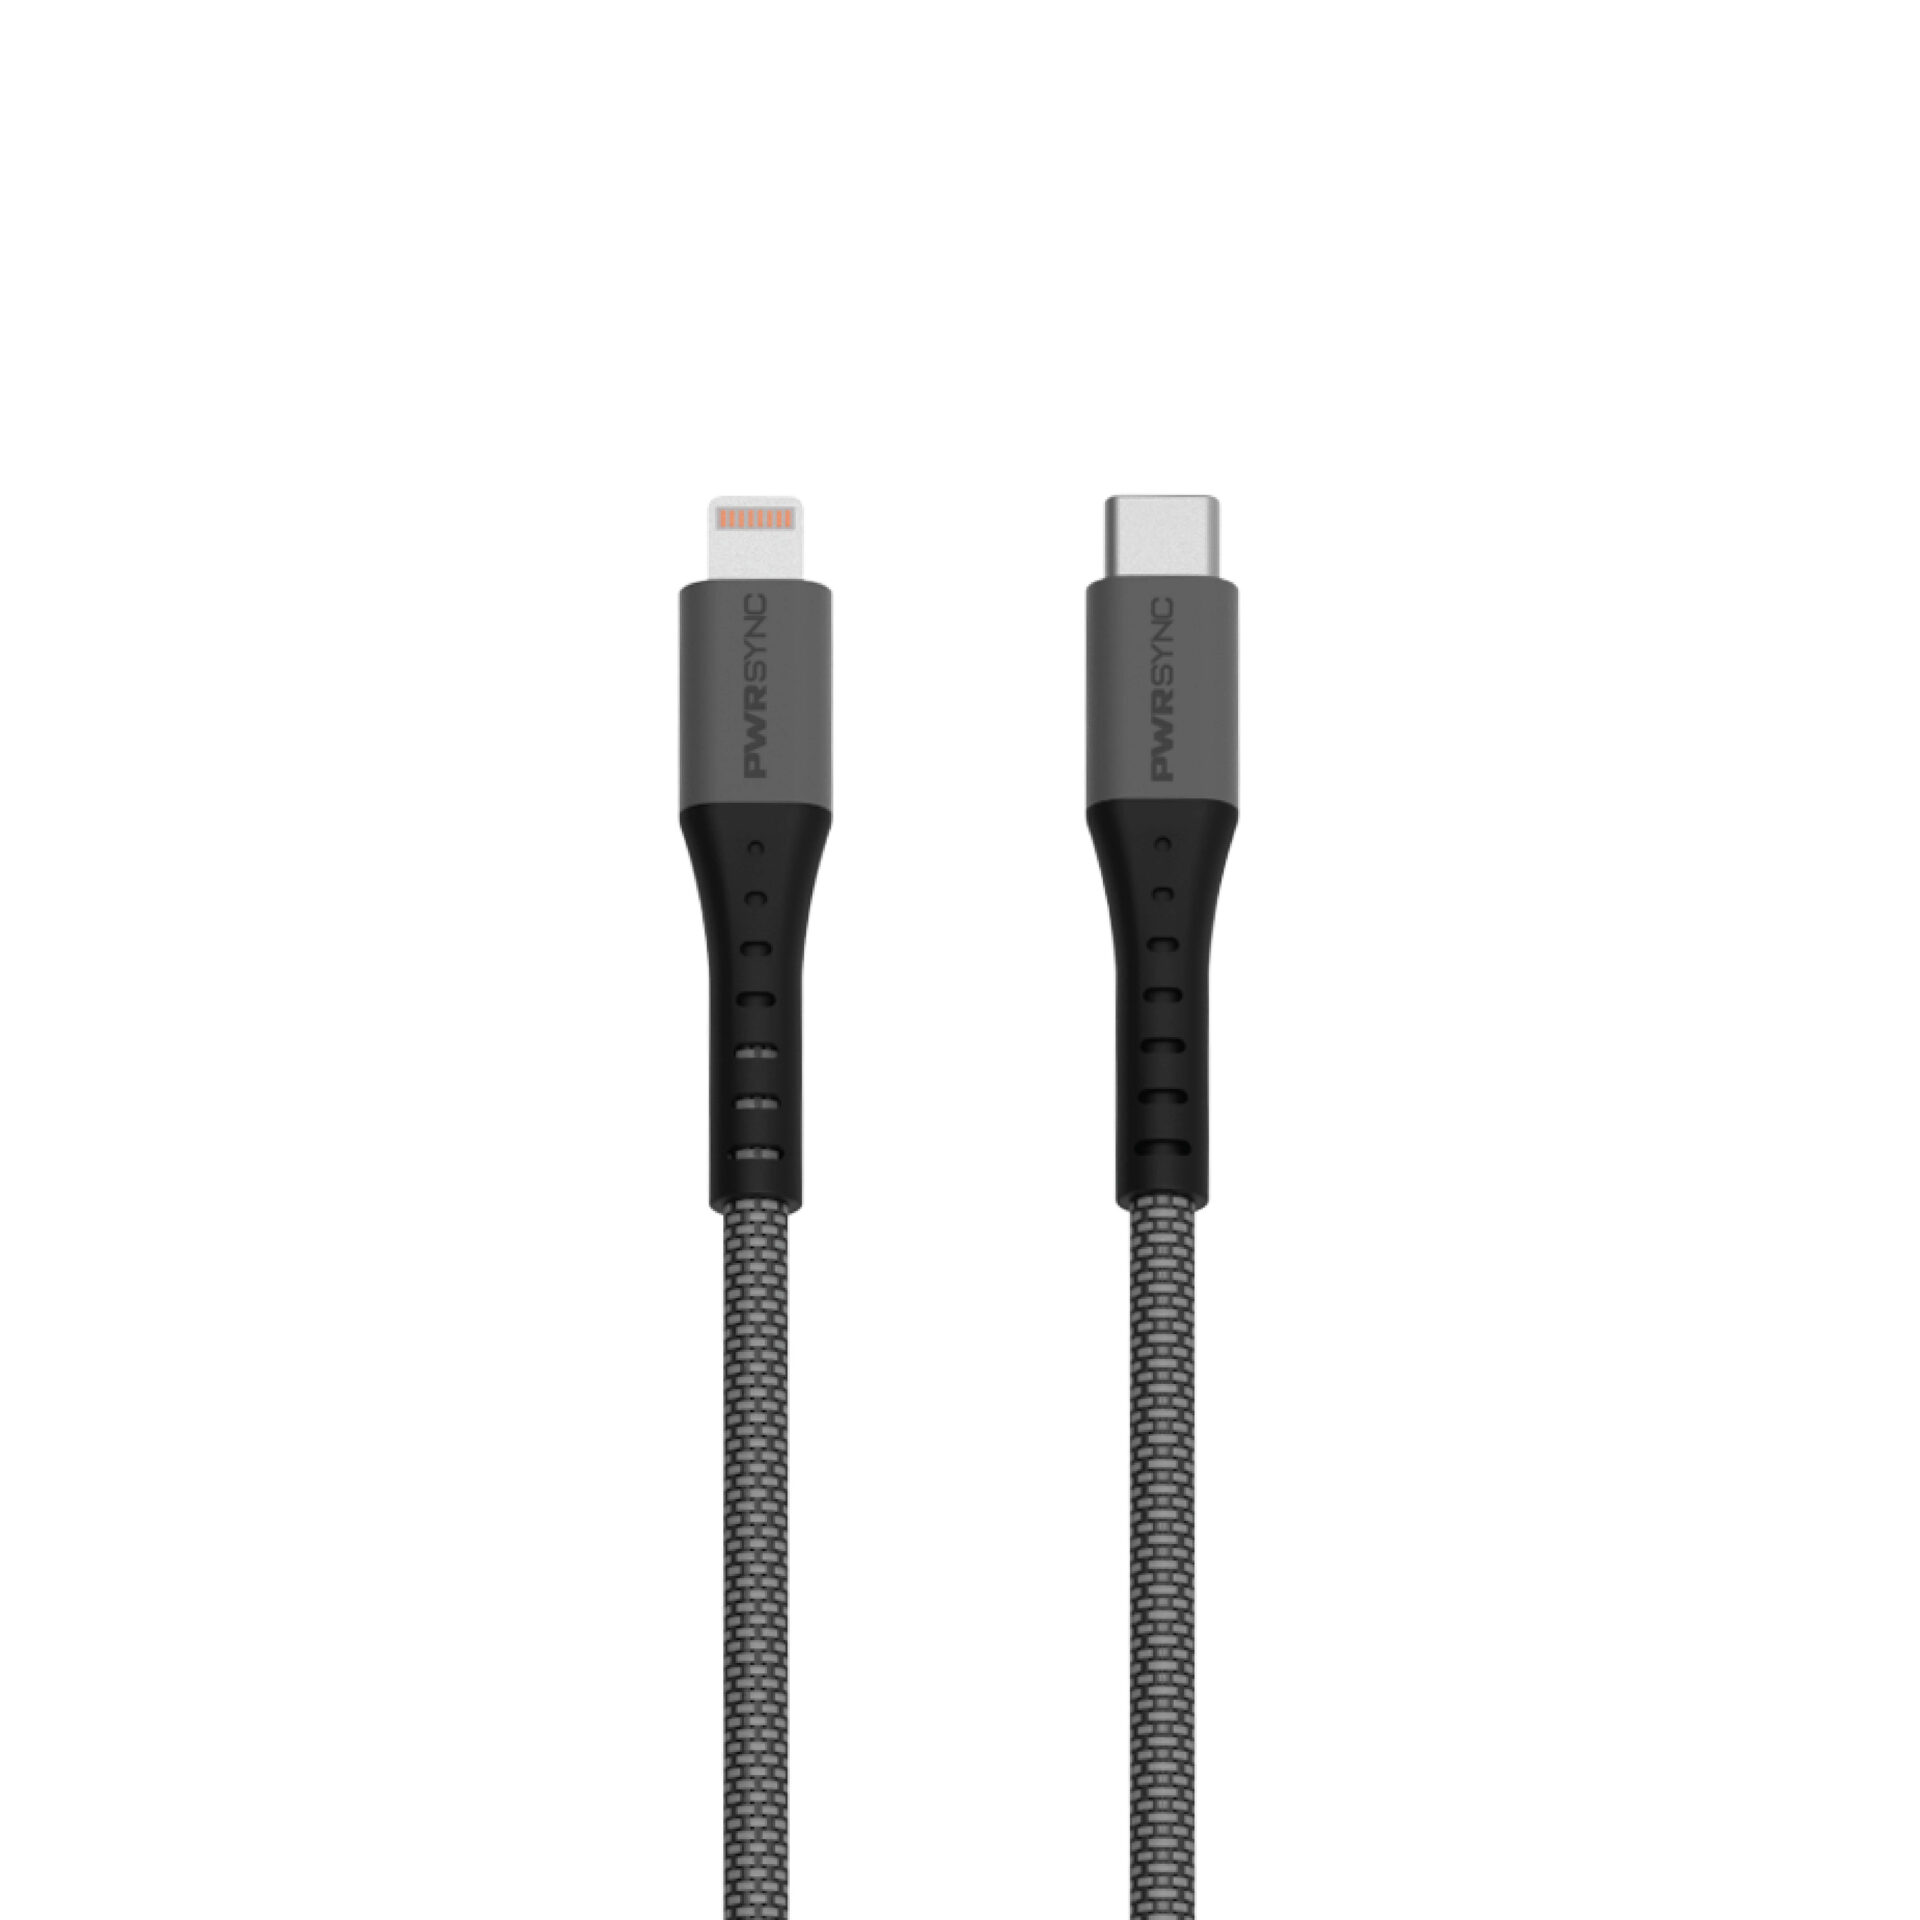 Are USB-C cables all the same? Let's compare cheap and expensive